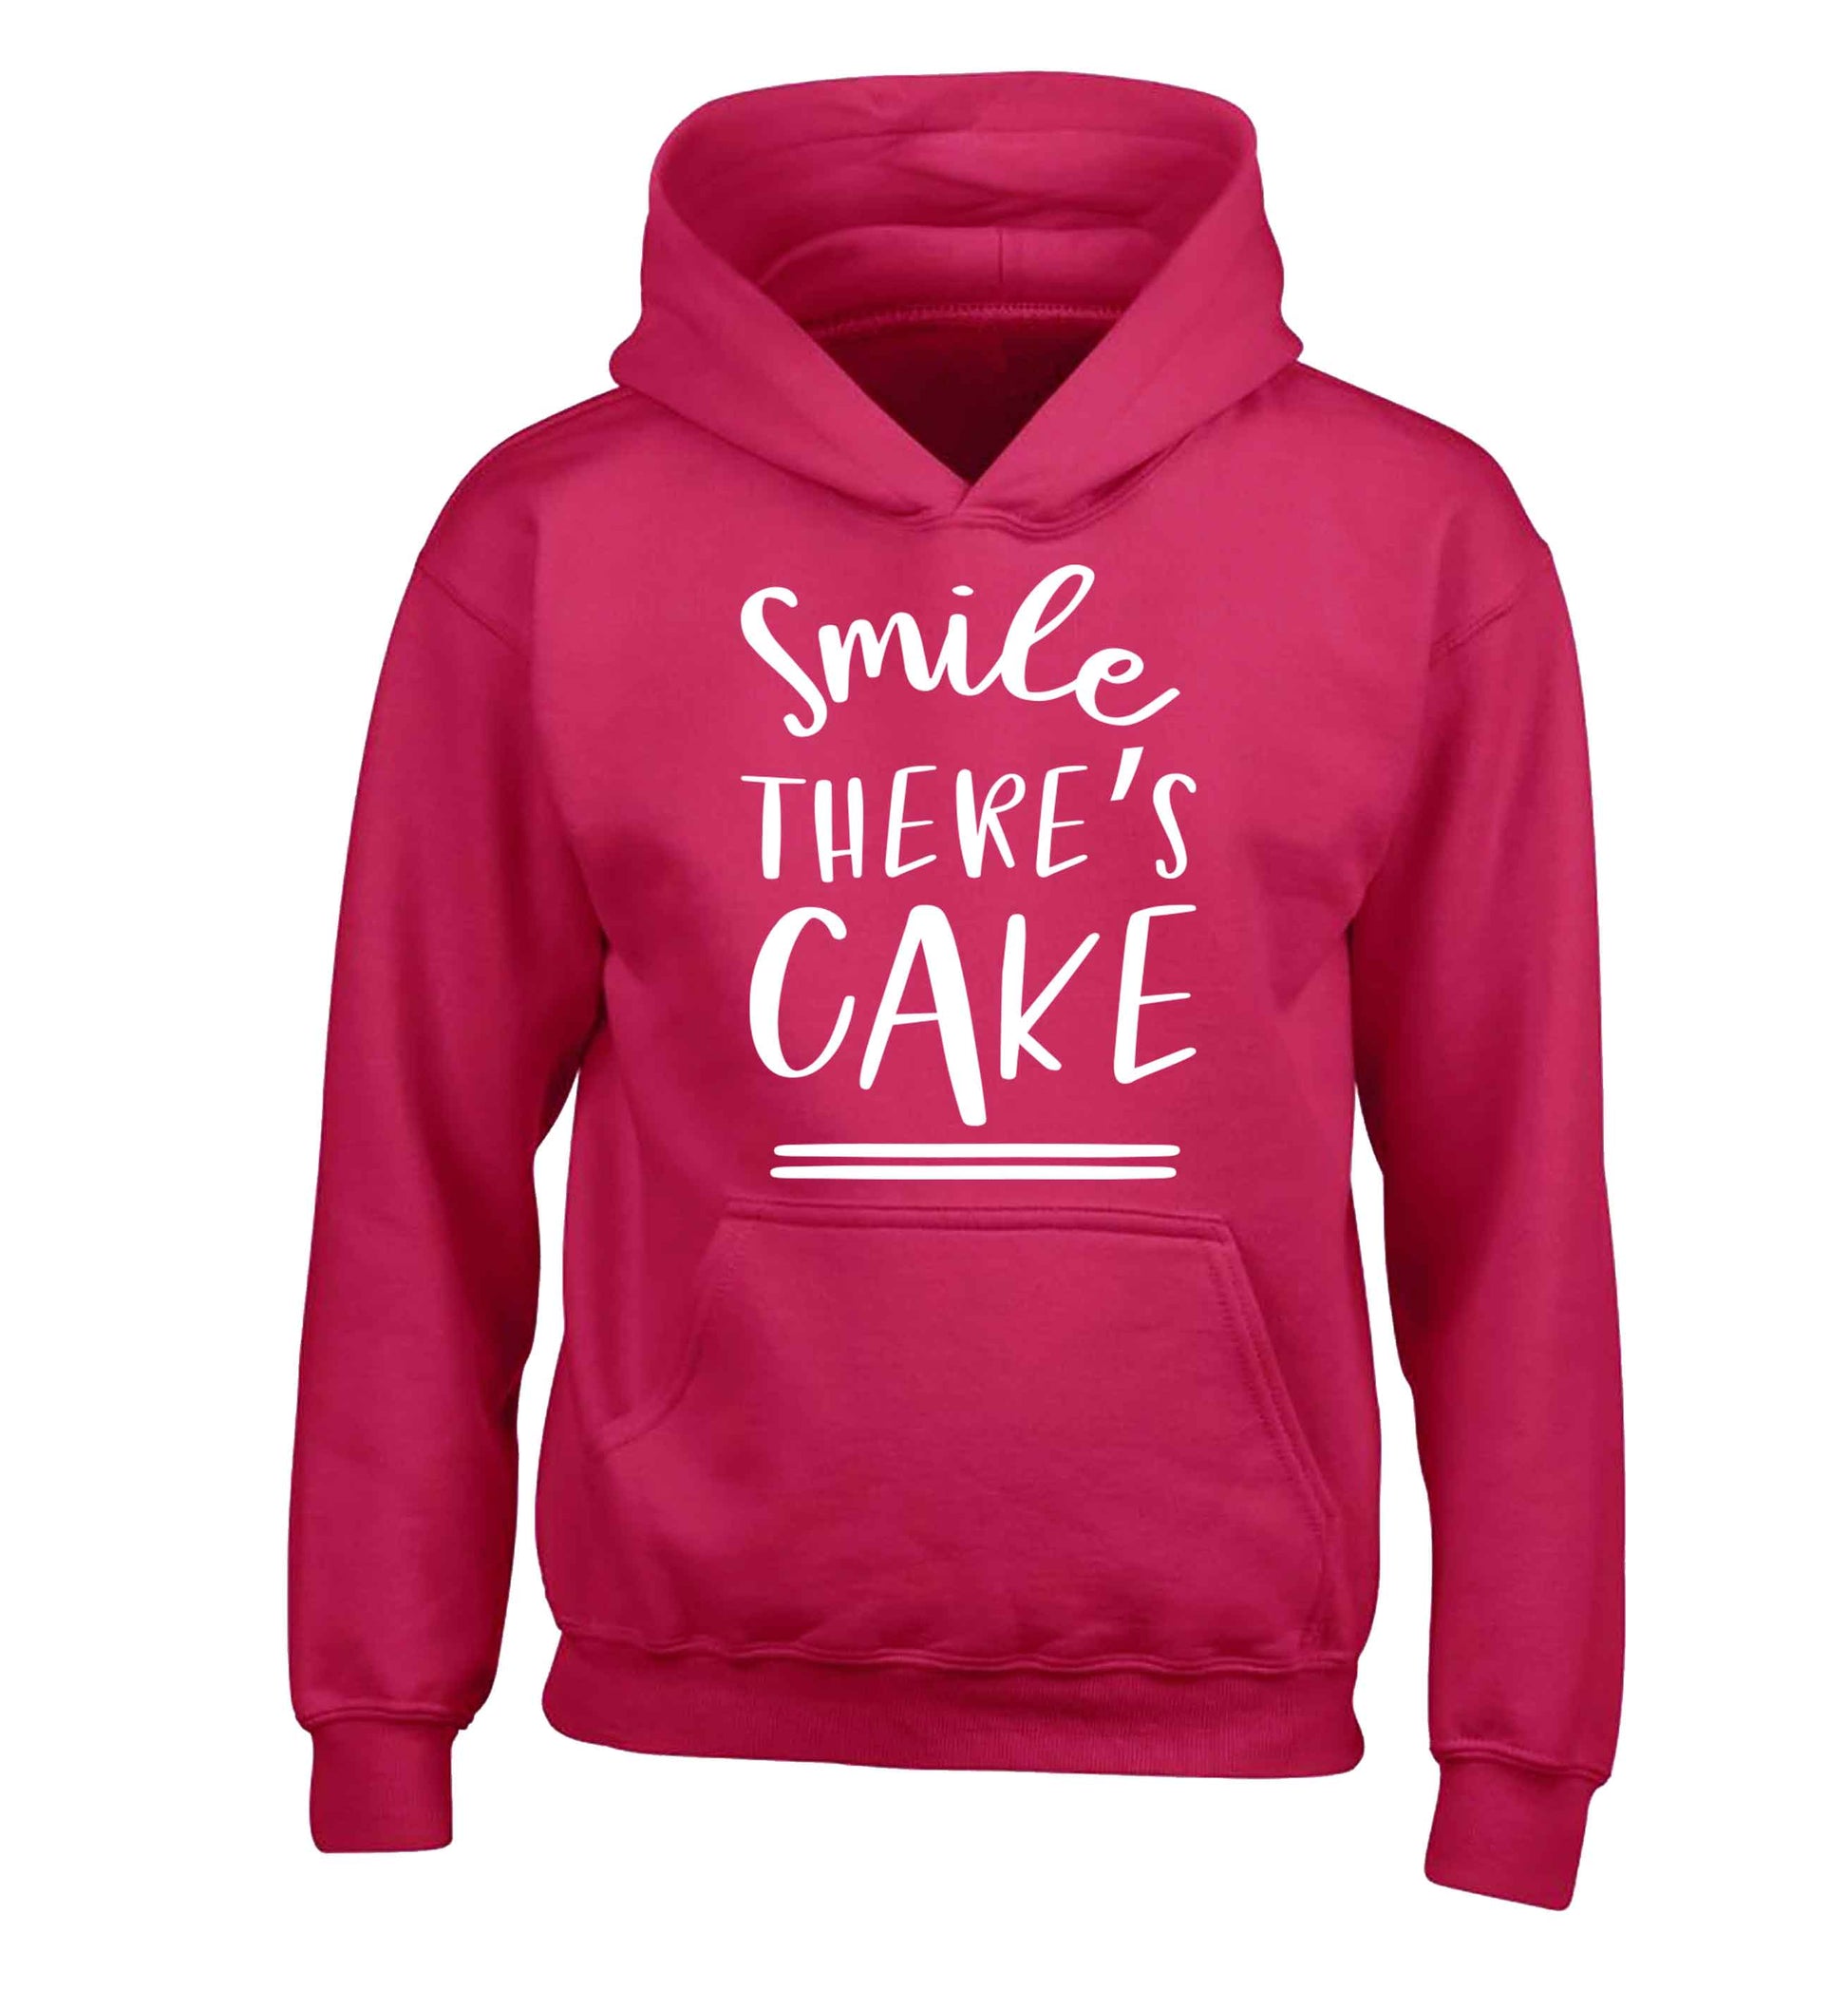 Smile there's cake children's pink hoodie 12-13 Years